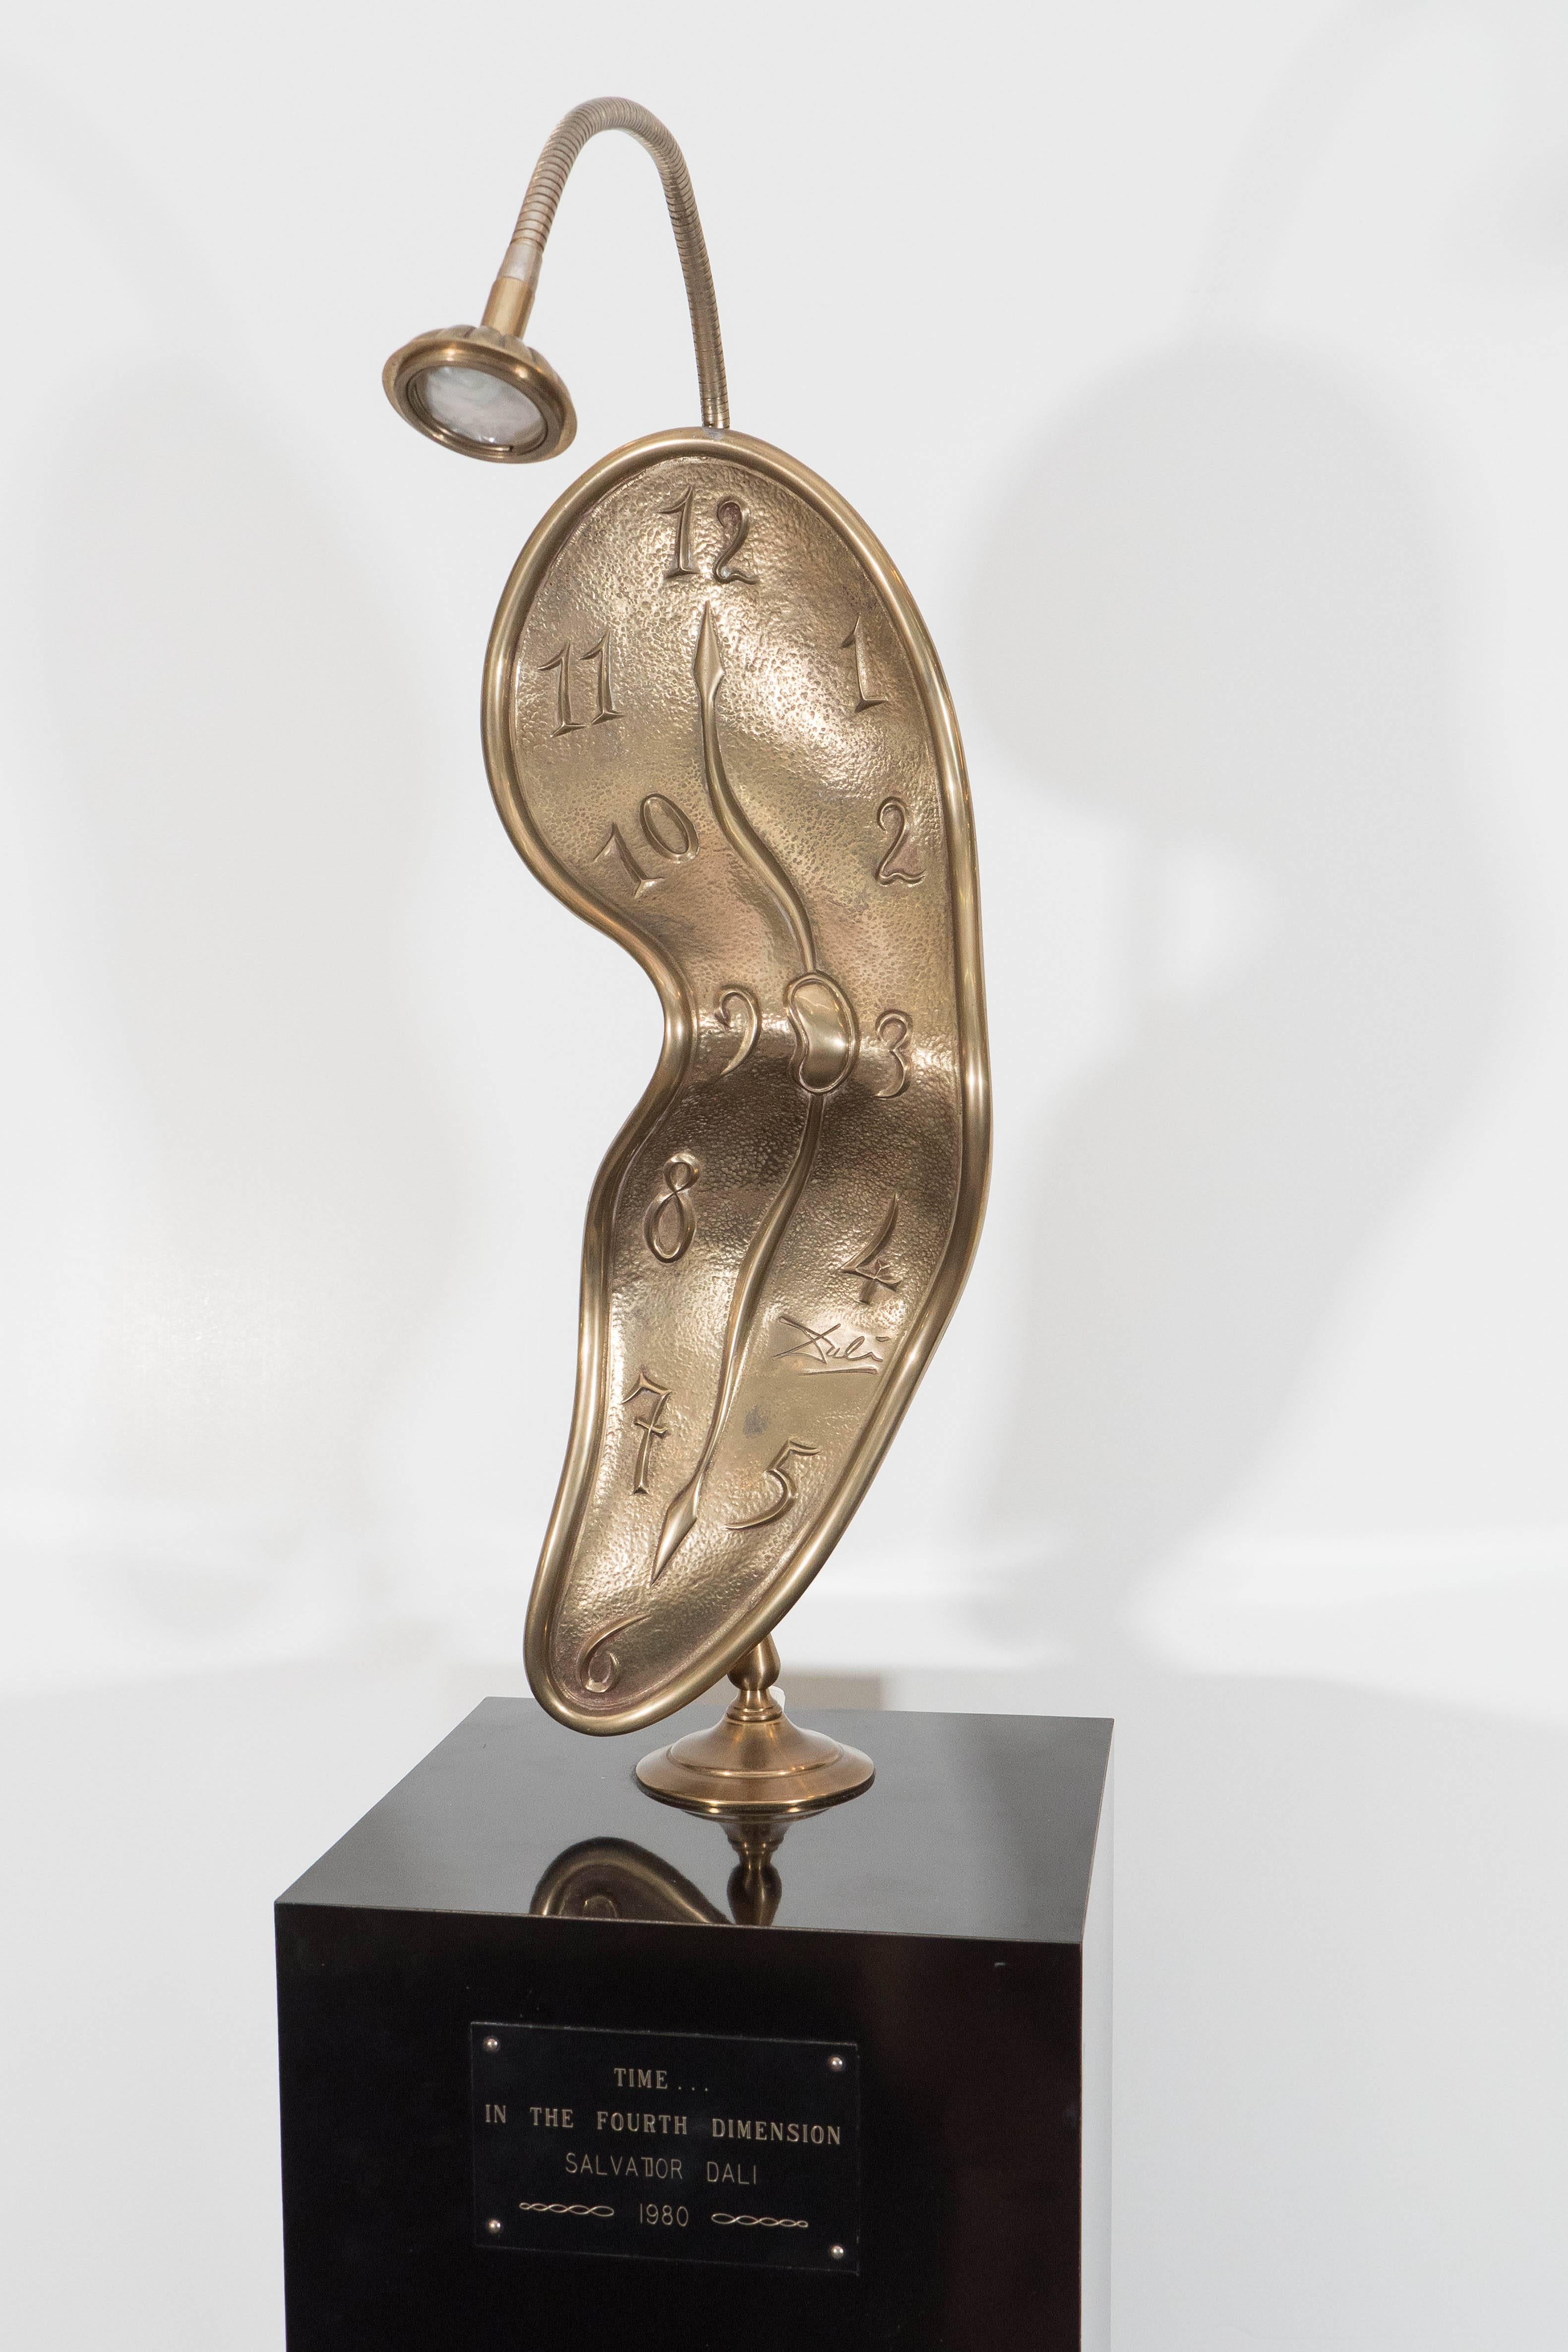 Dali's iconic melting clock image comes alive in sculptural form. Done in brass and mounted on a black acrylic pedestal, the piece is also wired to be a floor lamp with a movable pin bulb affixed above and a switch on the back. Plaque on front reads